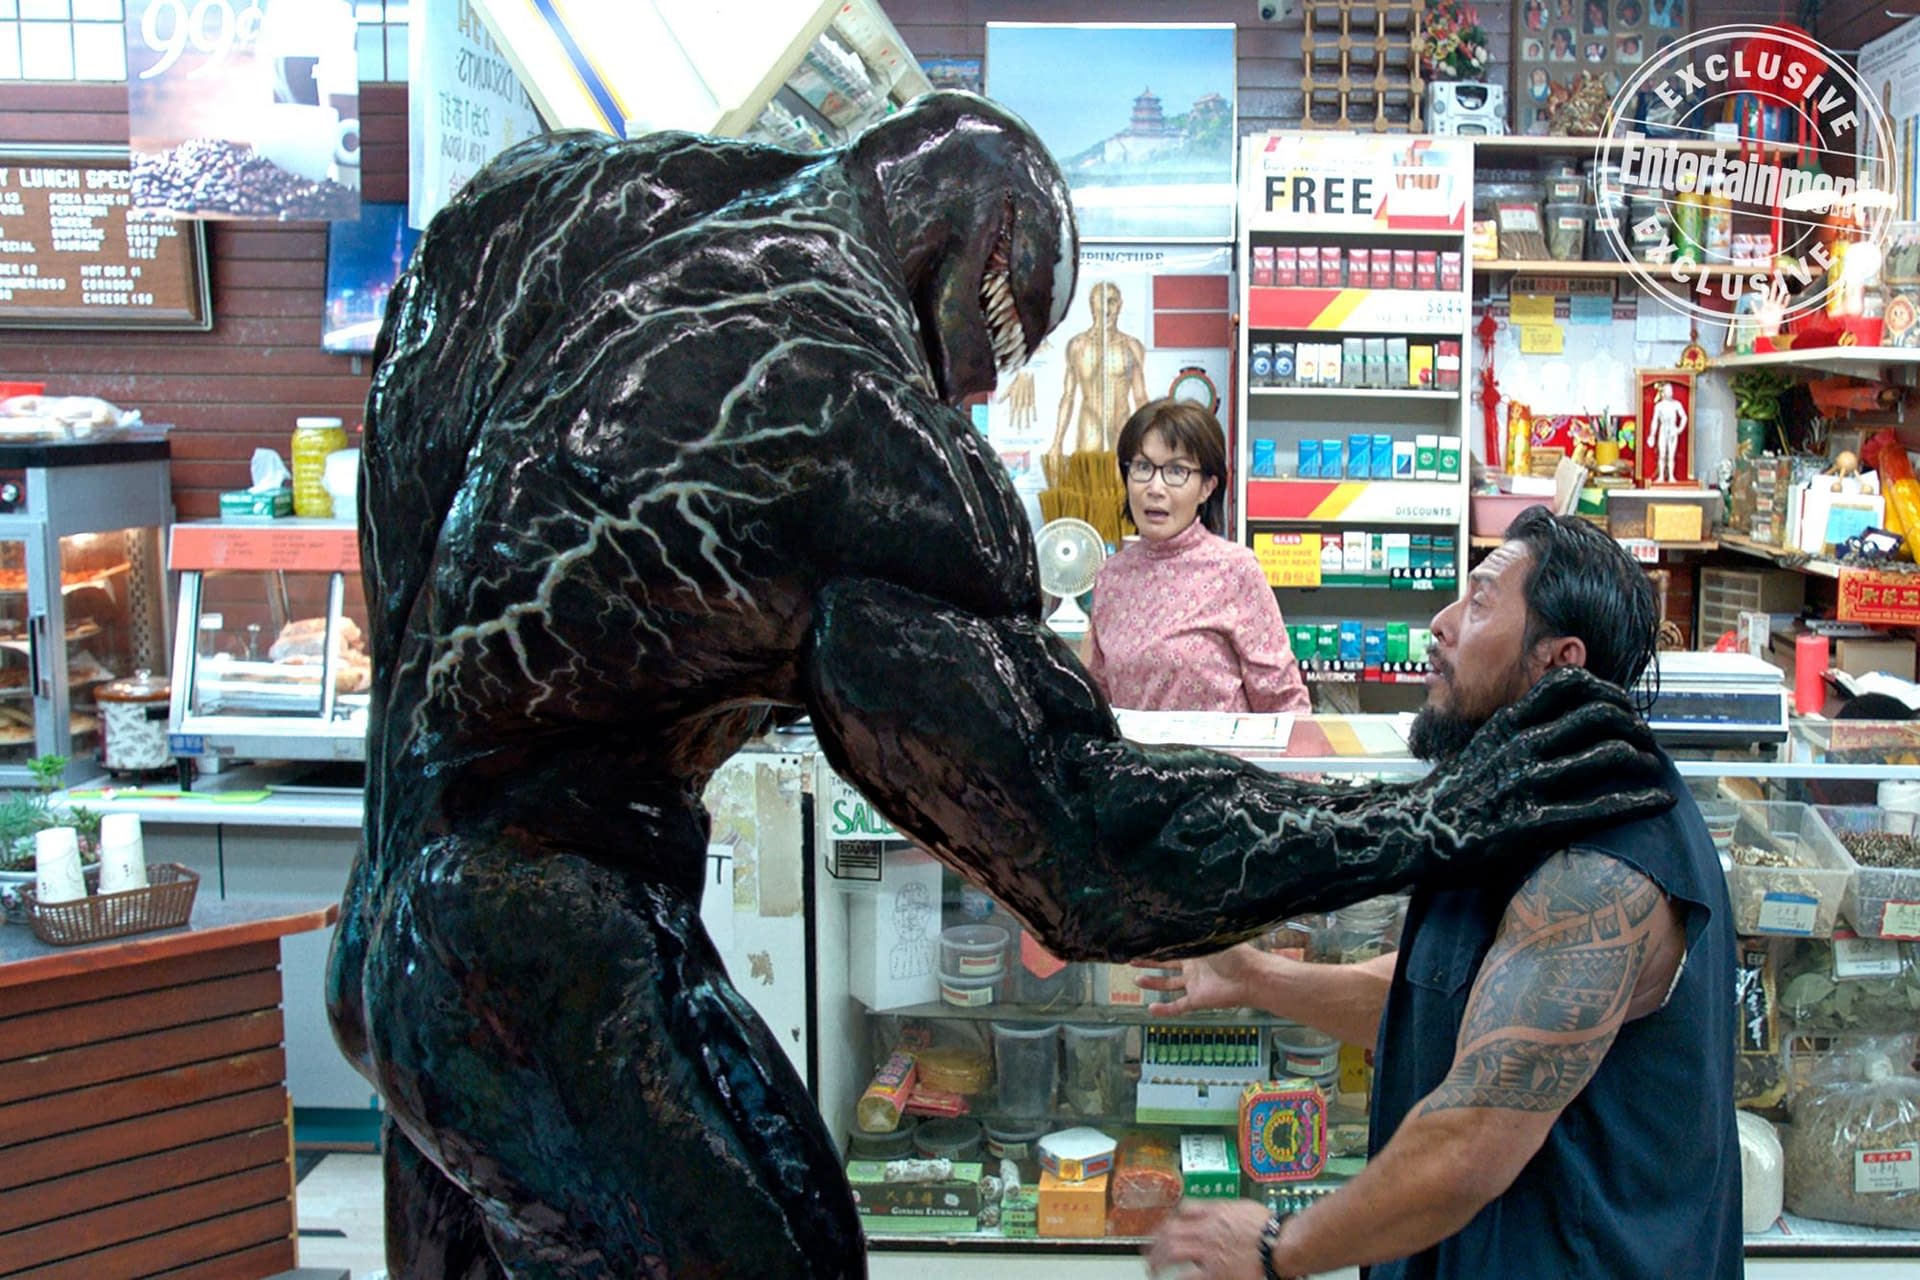 New Image from Venom Shows off the Details of the Monster